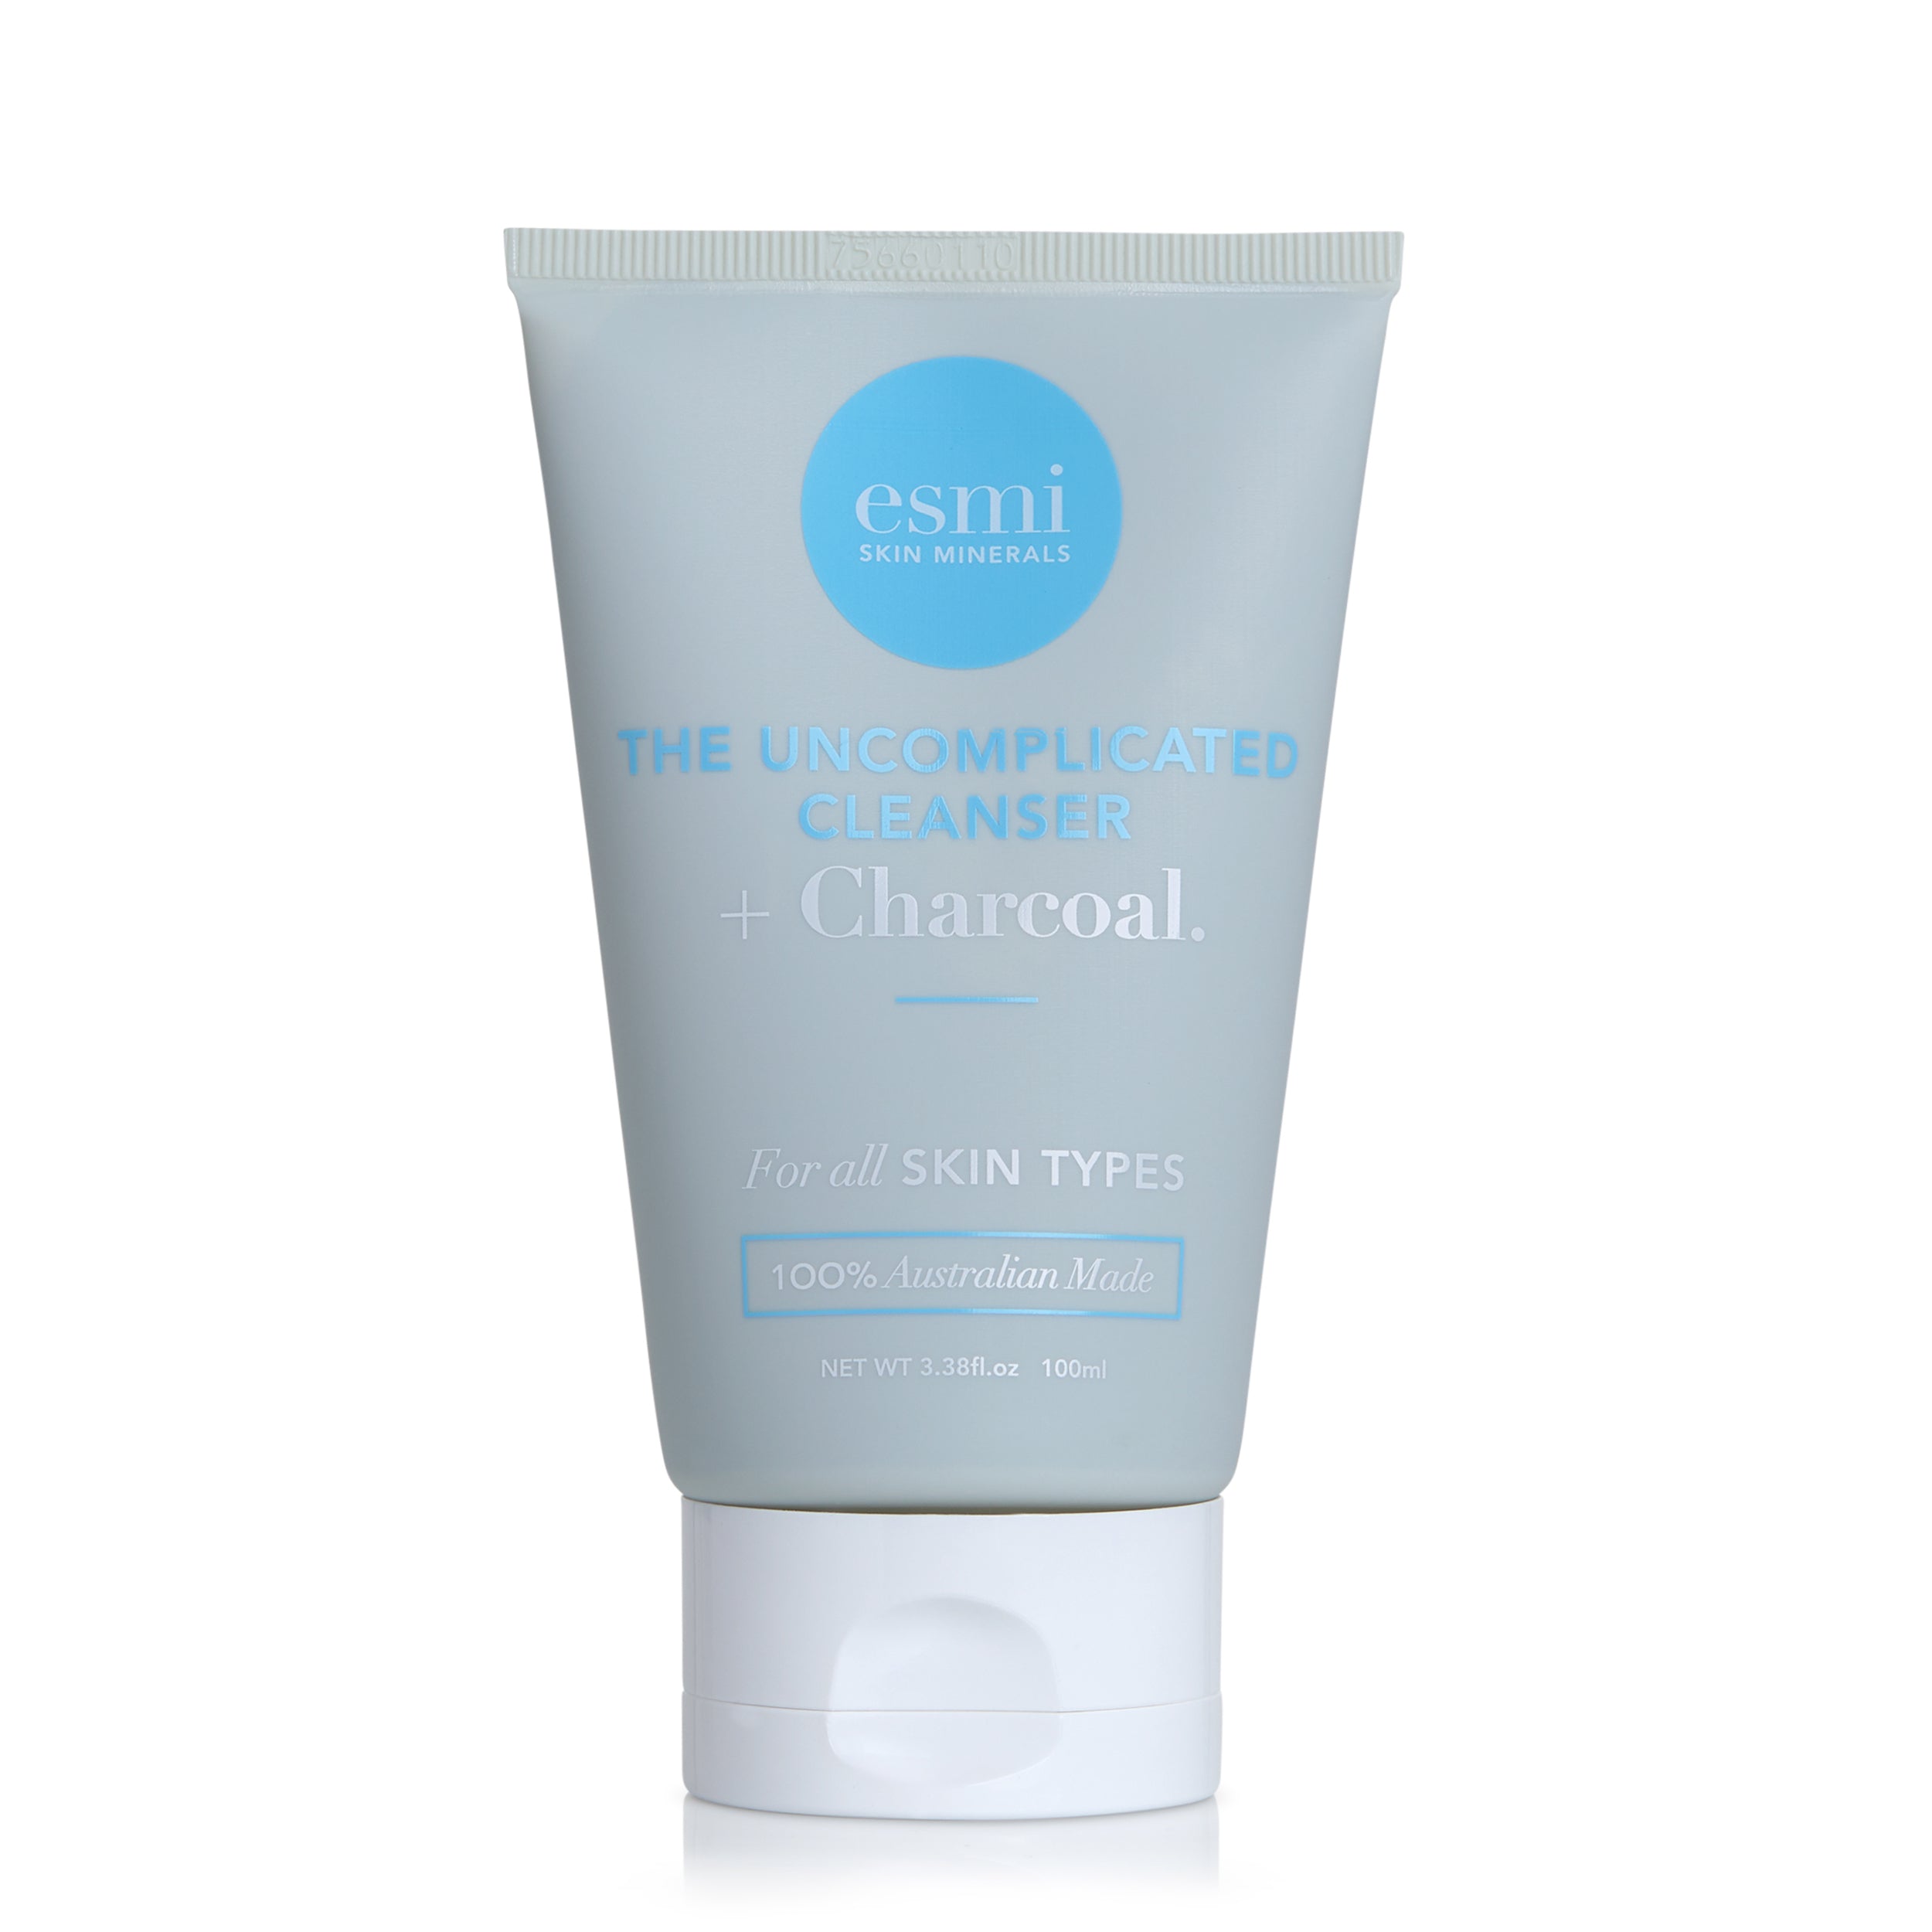 Image of The Uncomplicated Cleanser plus Charcoal